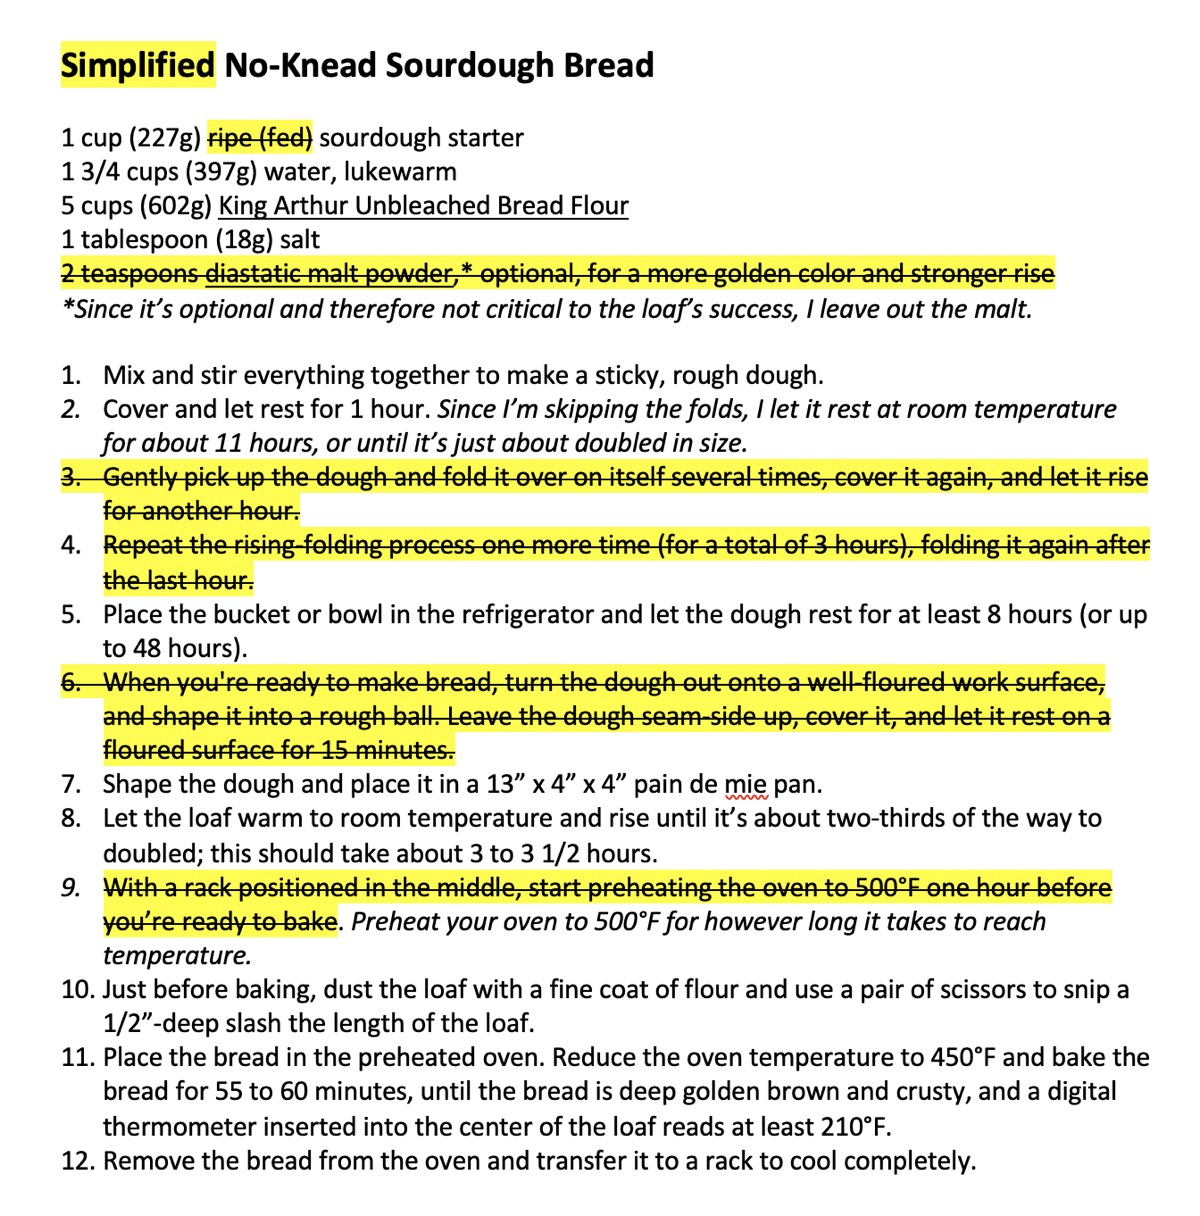 Written directions for No-Knead Sourdough Bread, with some of the steps crossed out.